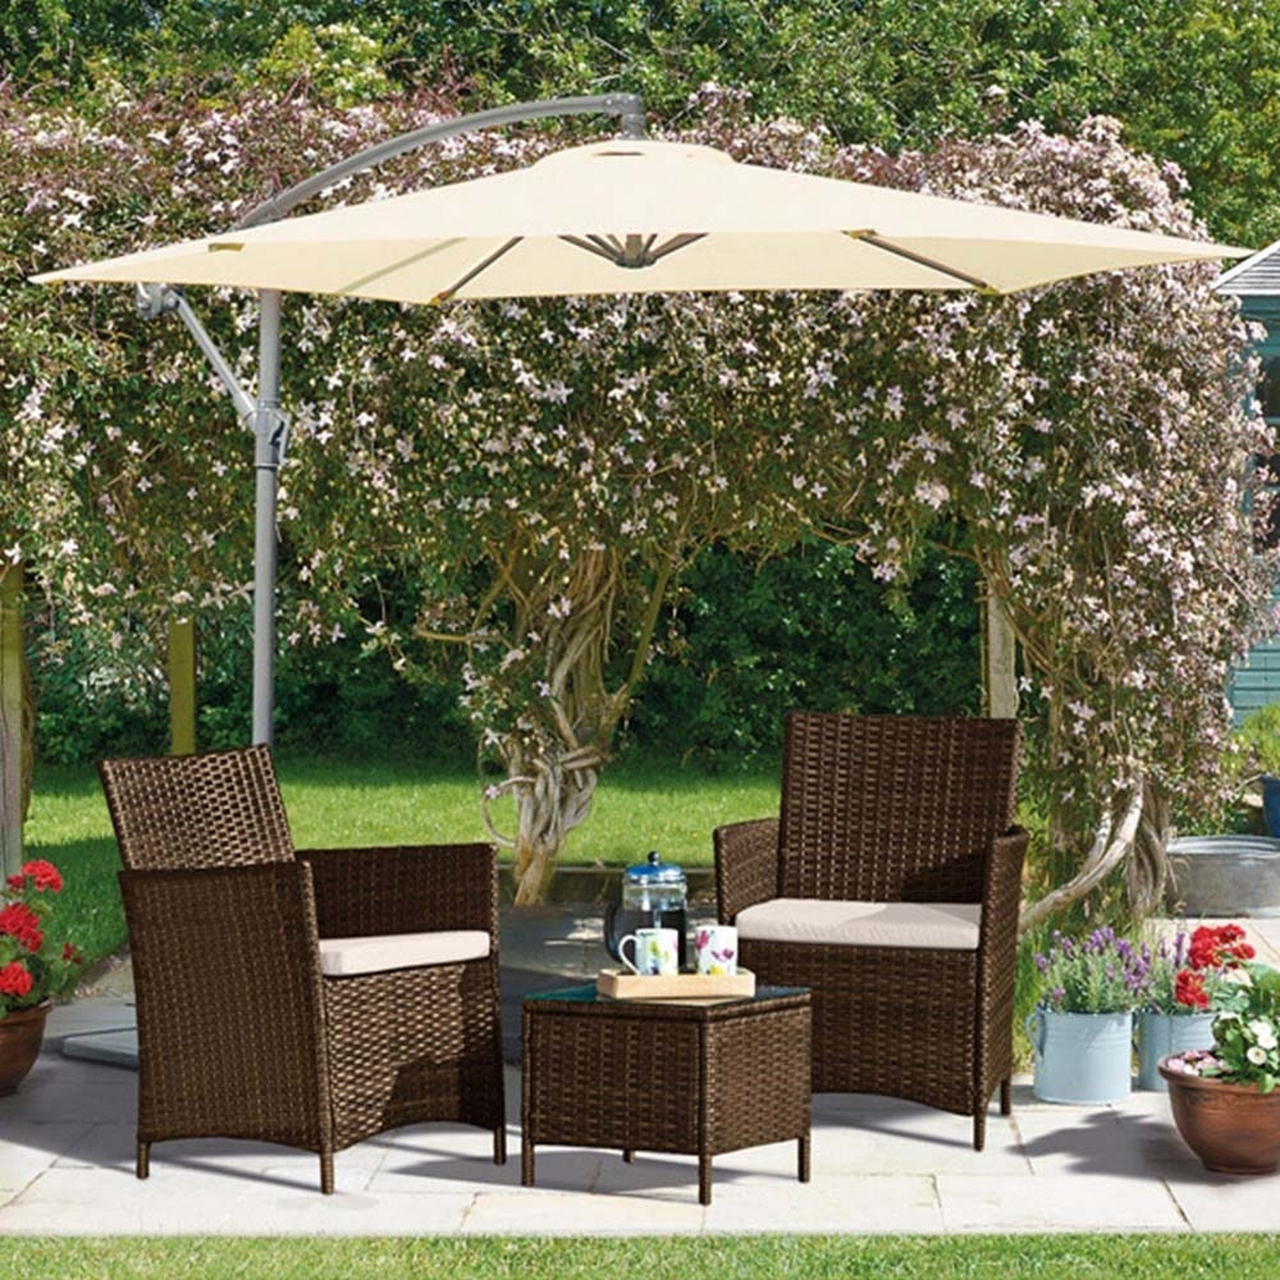 NEW 2022 SUMMER 3 Piece Rattan Garden Furniture Sets 2 X Rattan Chairs and Coffee Table with Hard Wearing Cushions